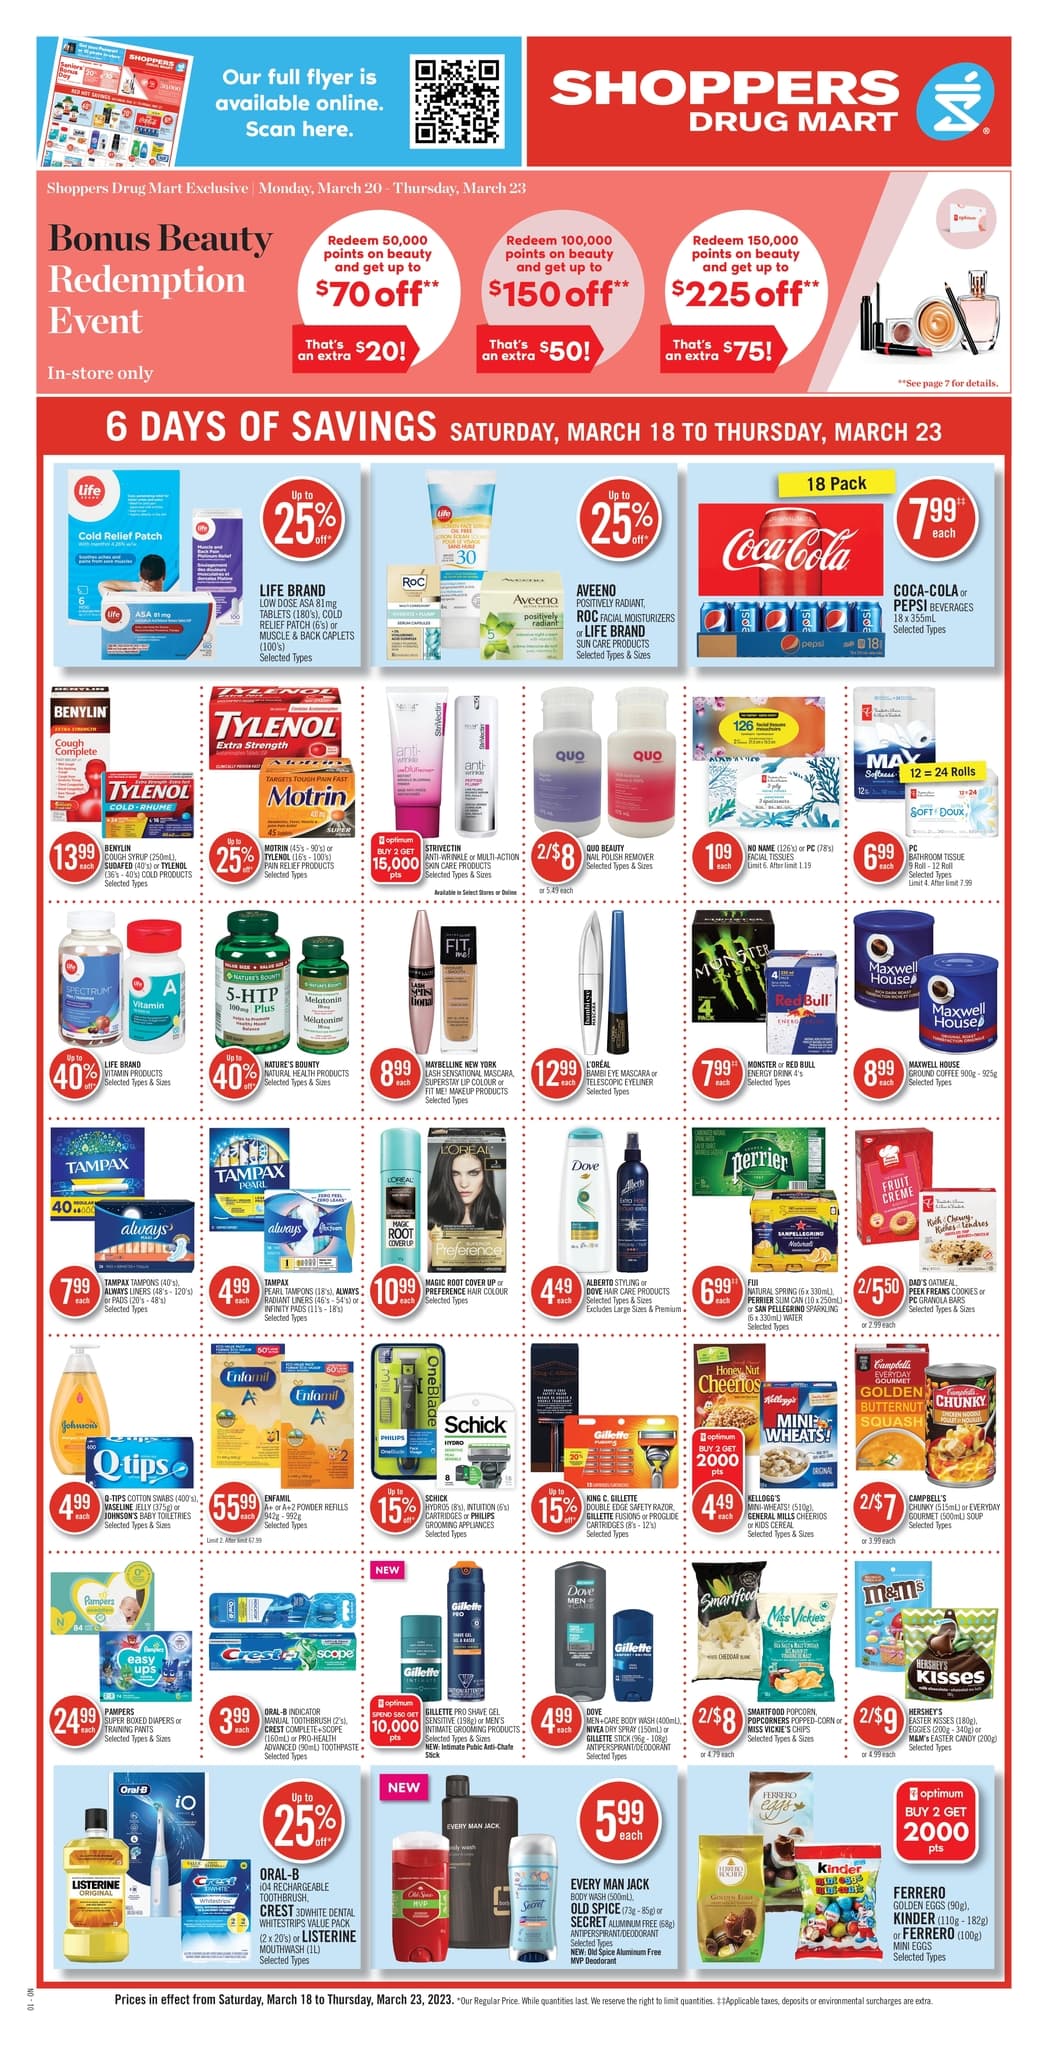 Shoppers Drug Mart - Weekly Flyer Specials - Page 1